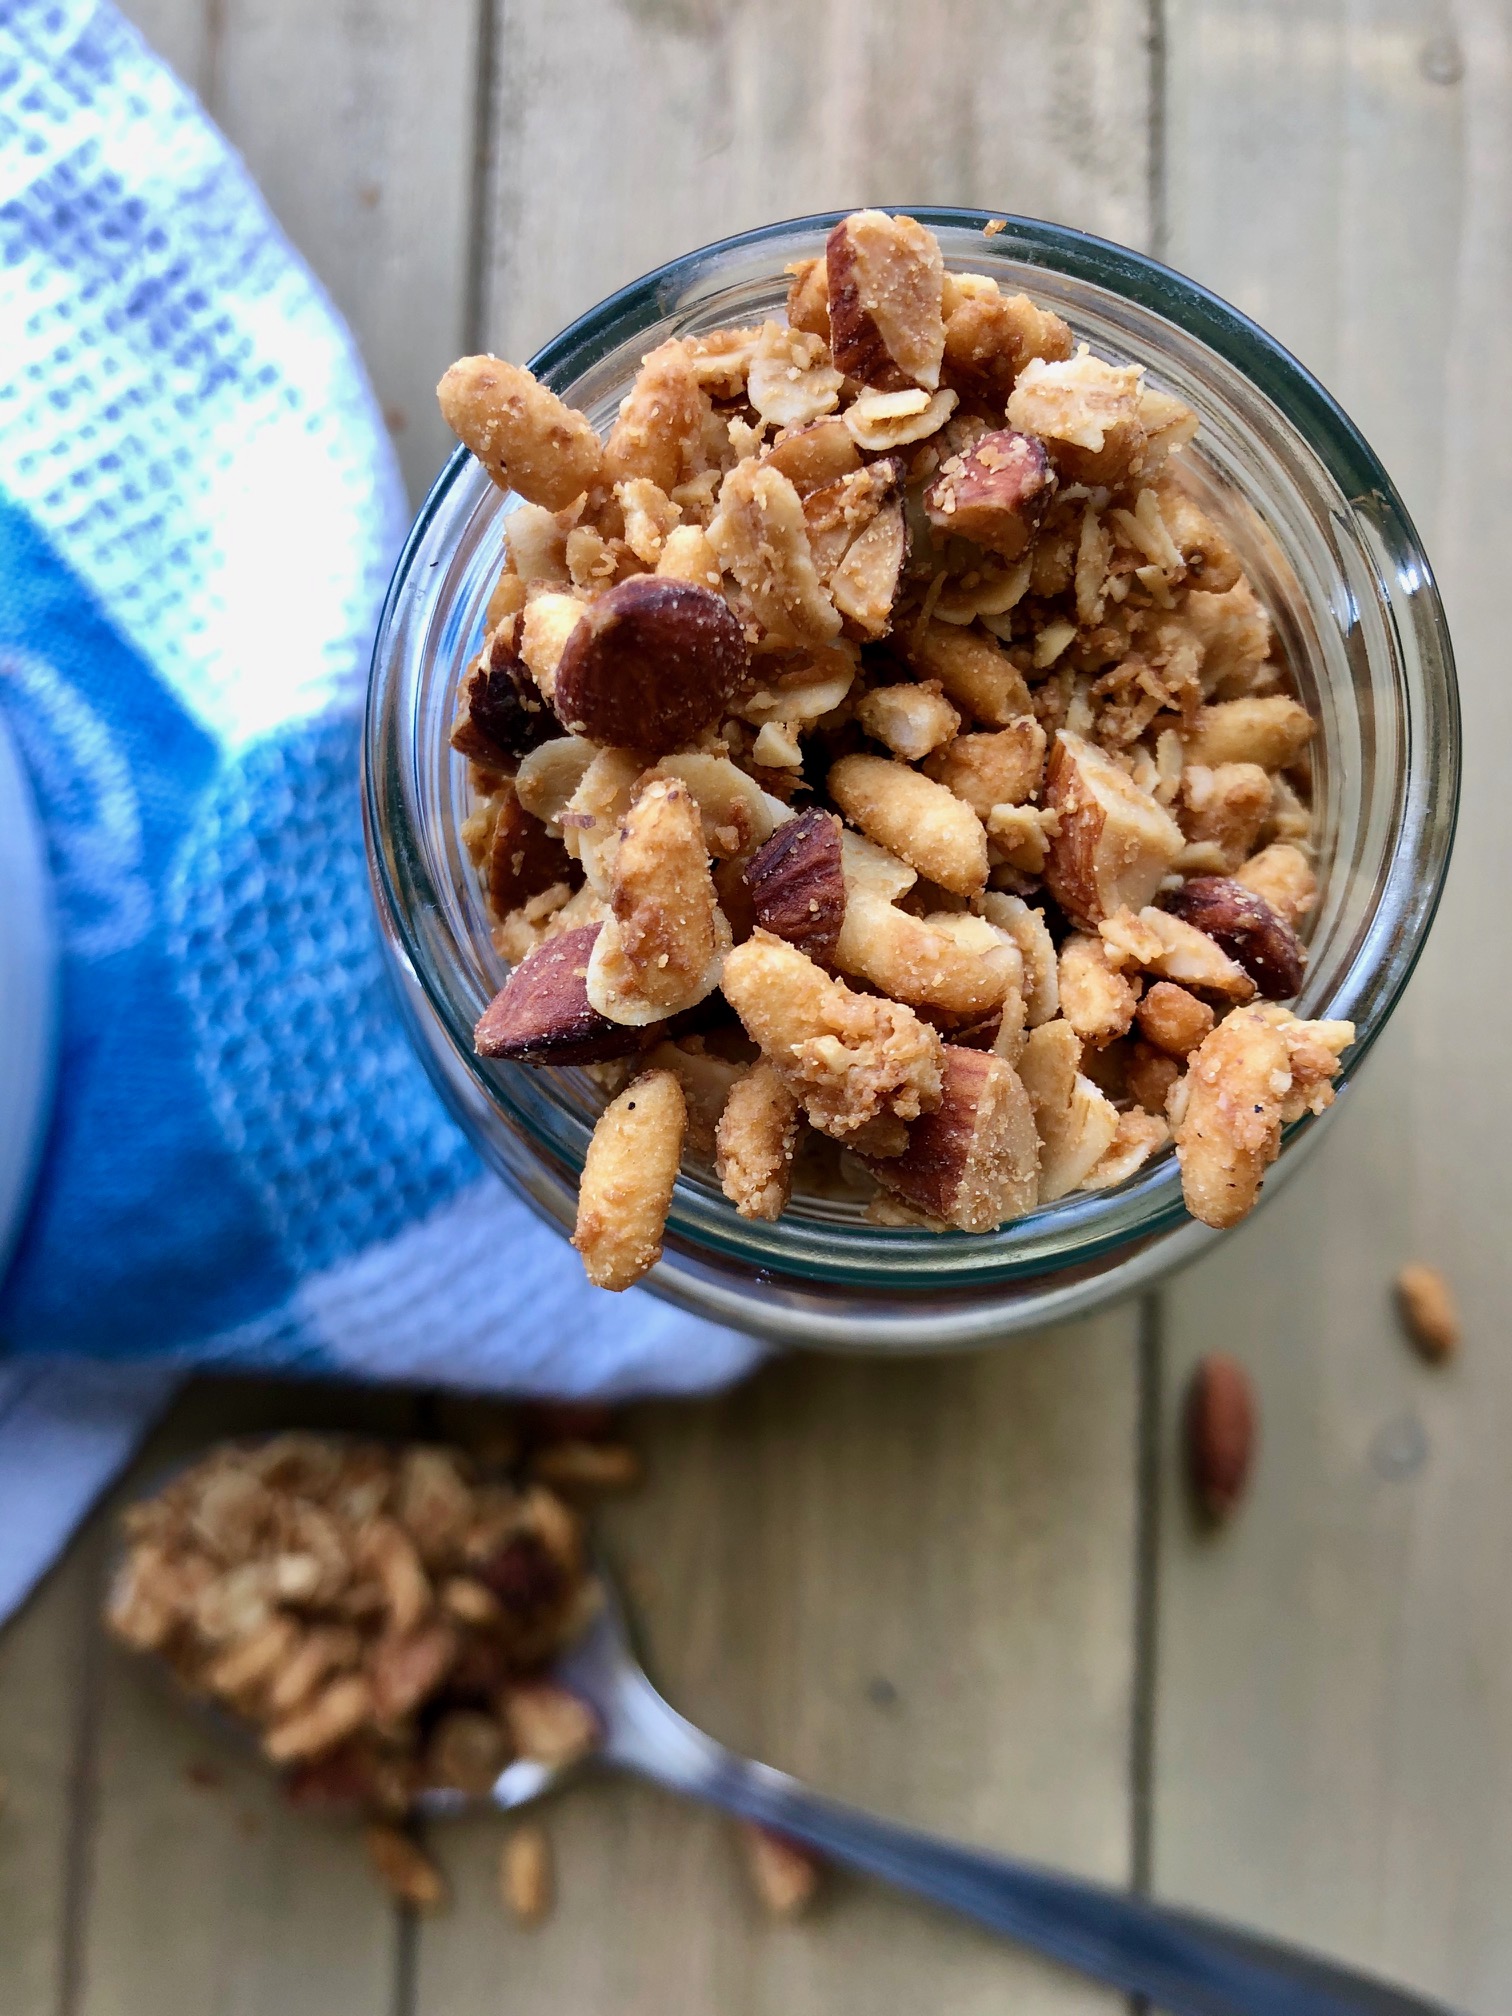 This Crispy Peanut Butter Granola is so moreish, you'll love it sprinkled over your yoghurt or eaten by itself by the spoonful!